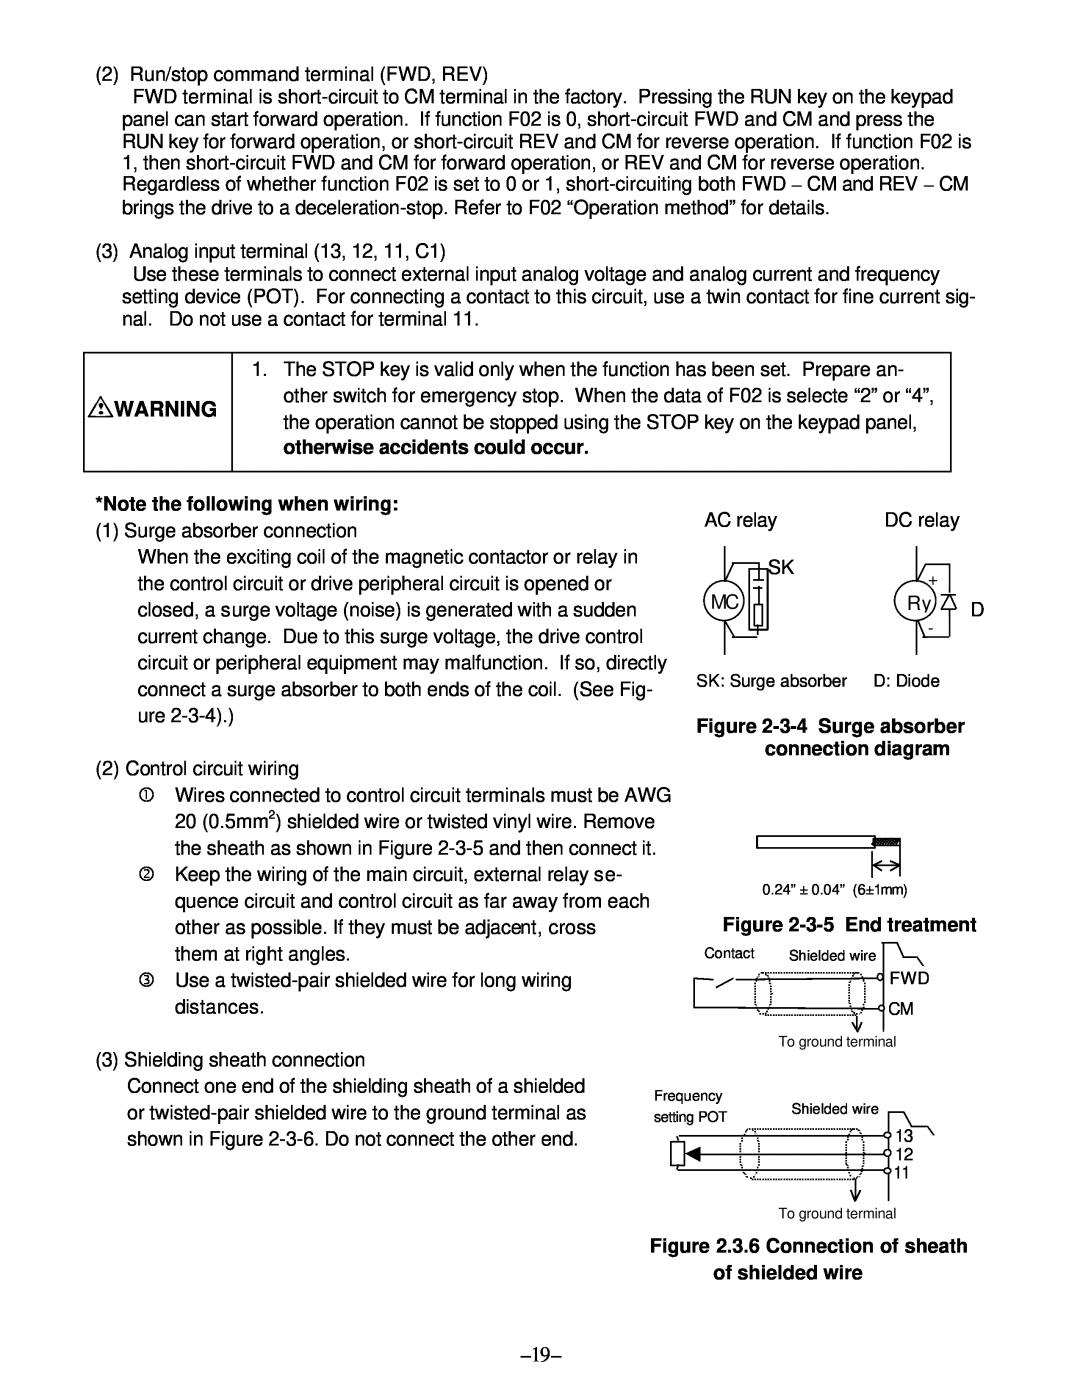 GE C11, AF-300 manual Note the following when wiring, 3-4 Surge absorber connection diagram, 3-5 End treatment 